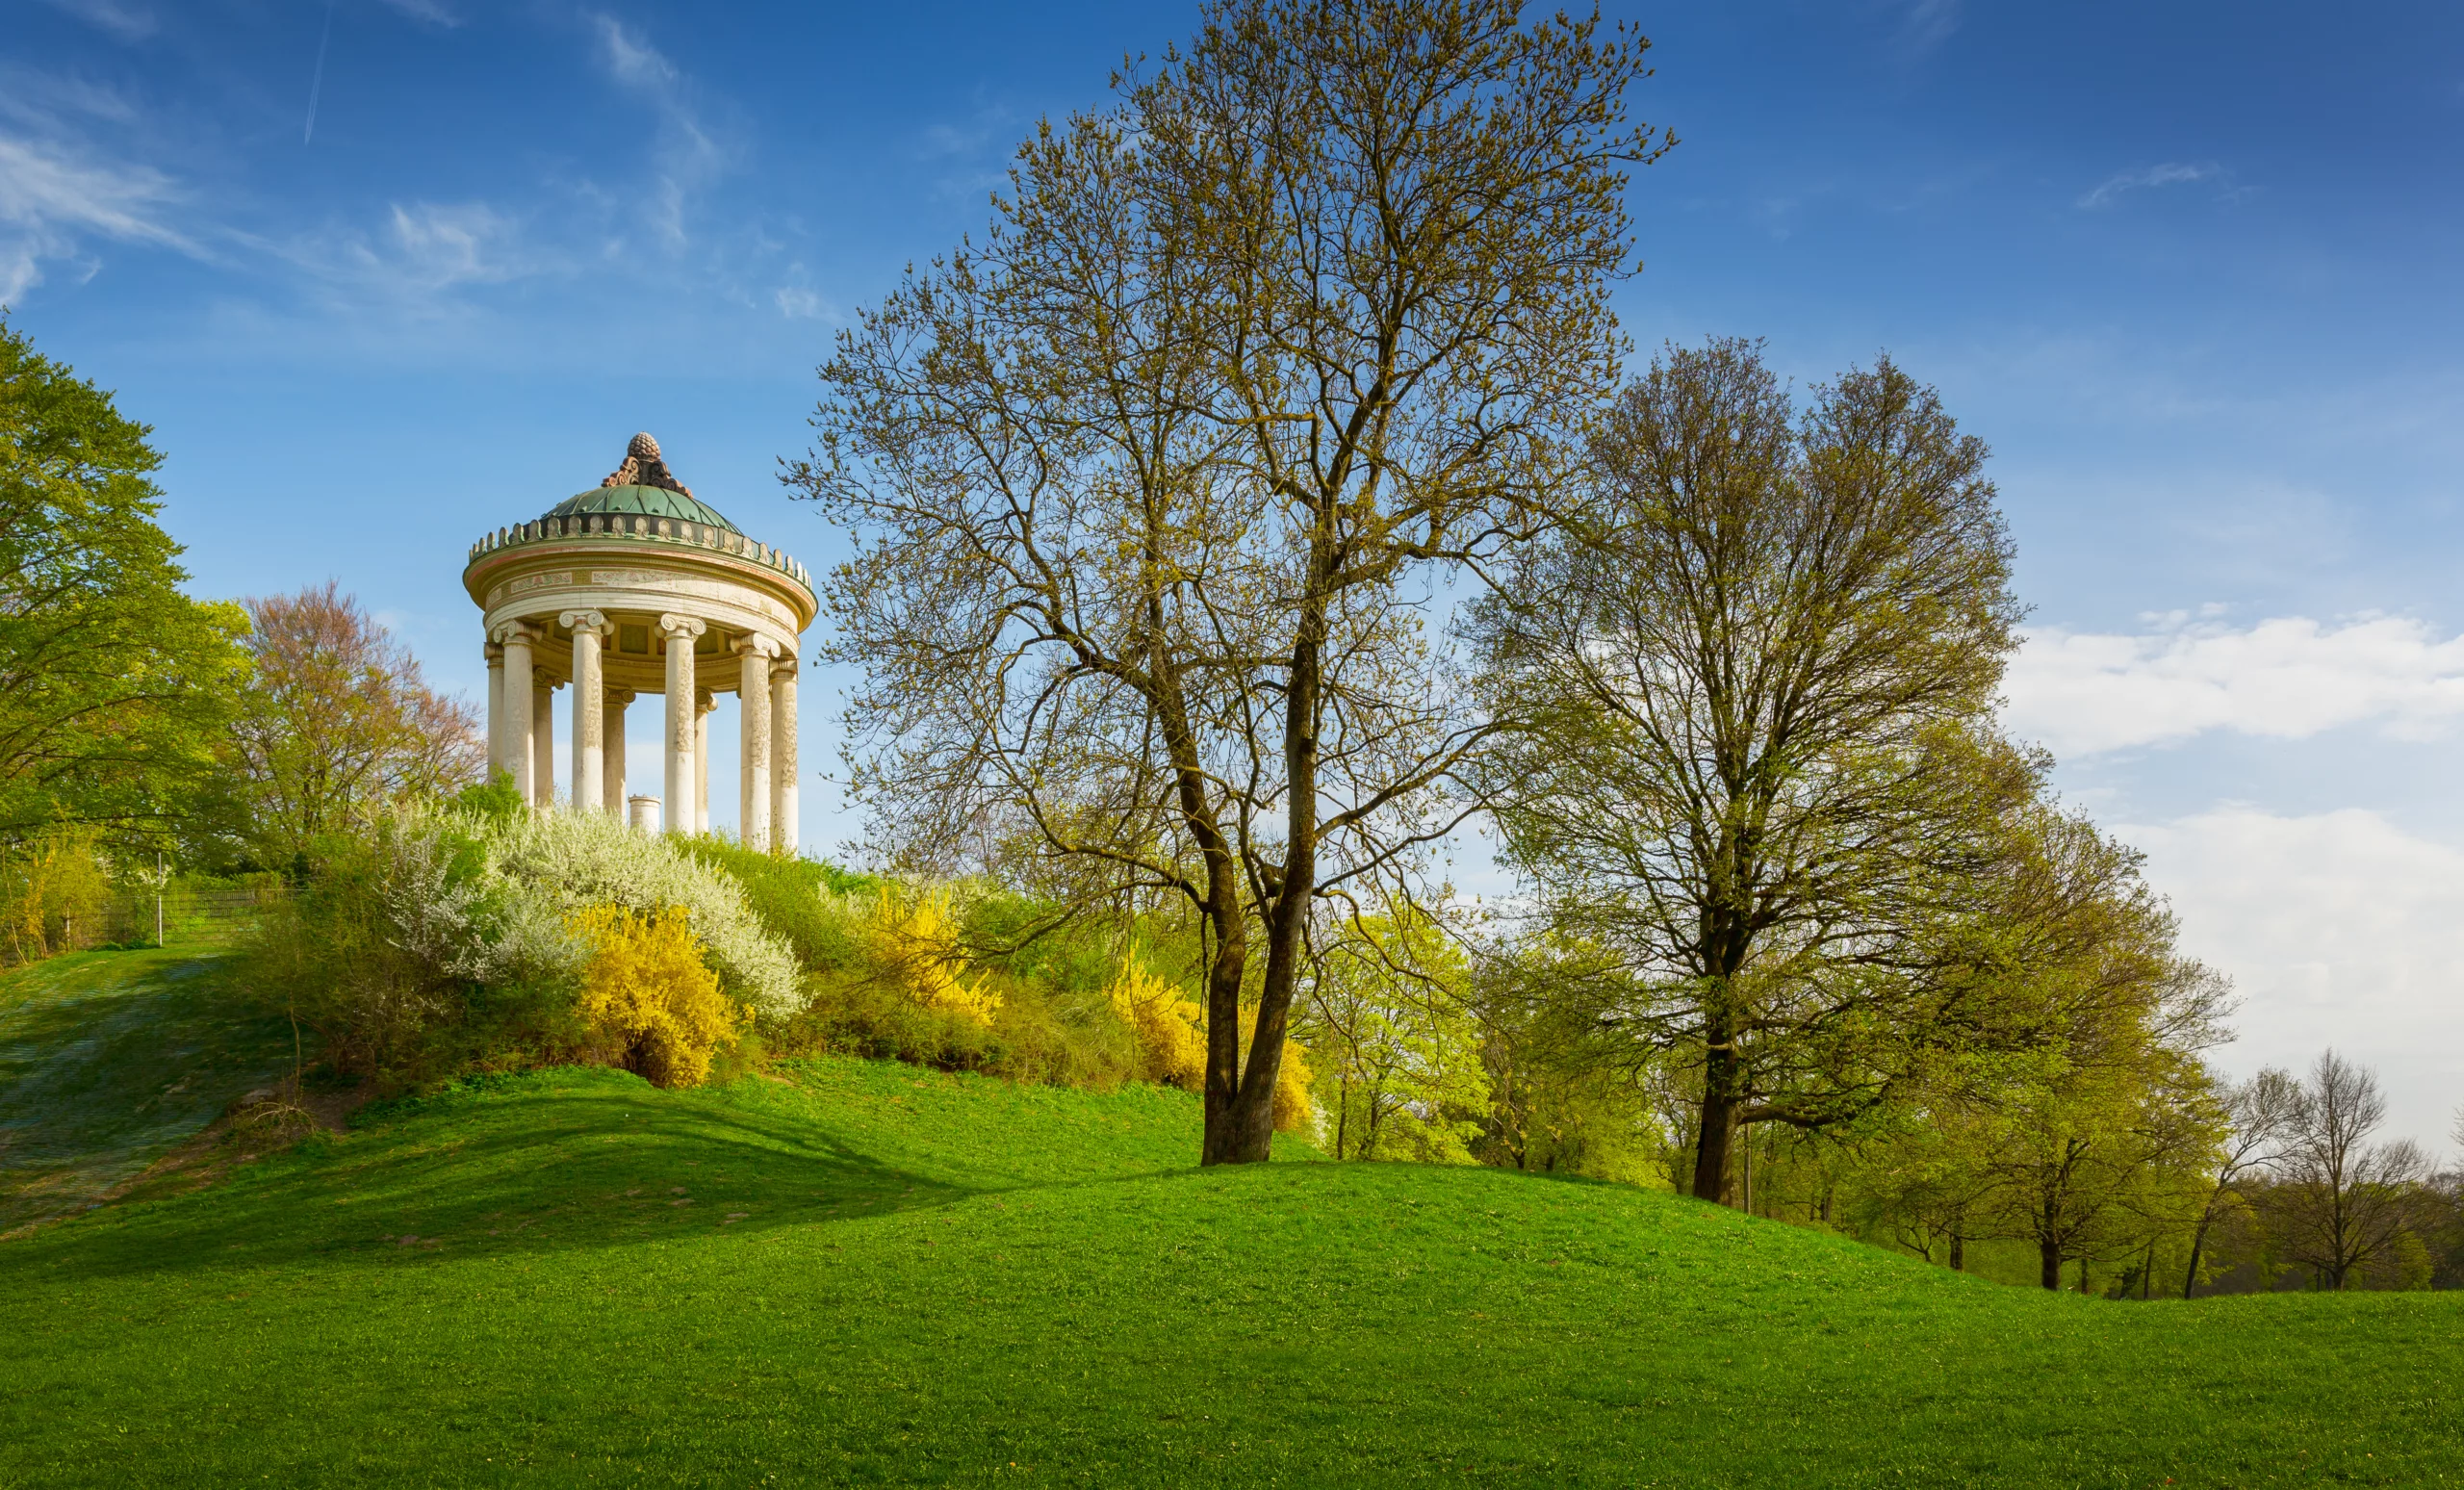 The Monopteros Temple in the English Gardens in Munich, Germany